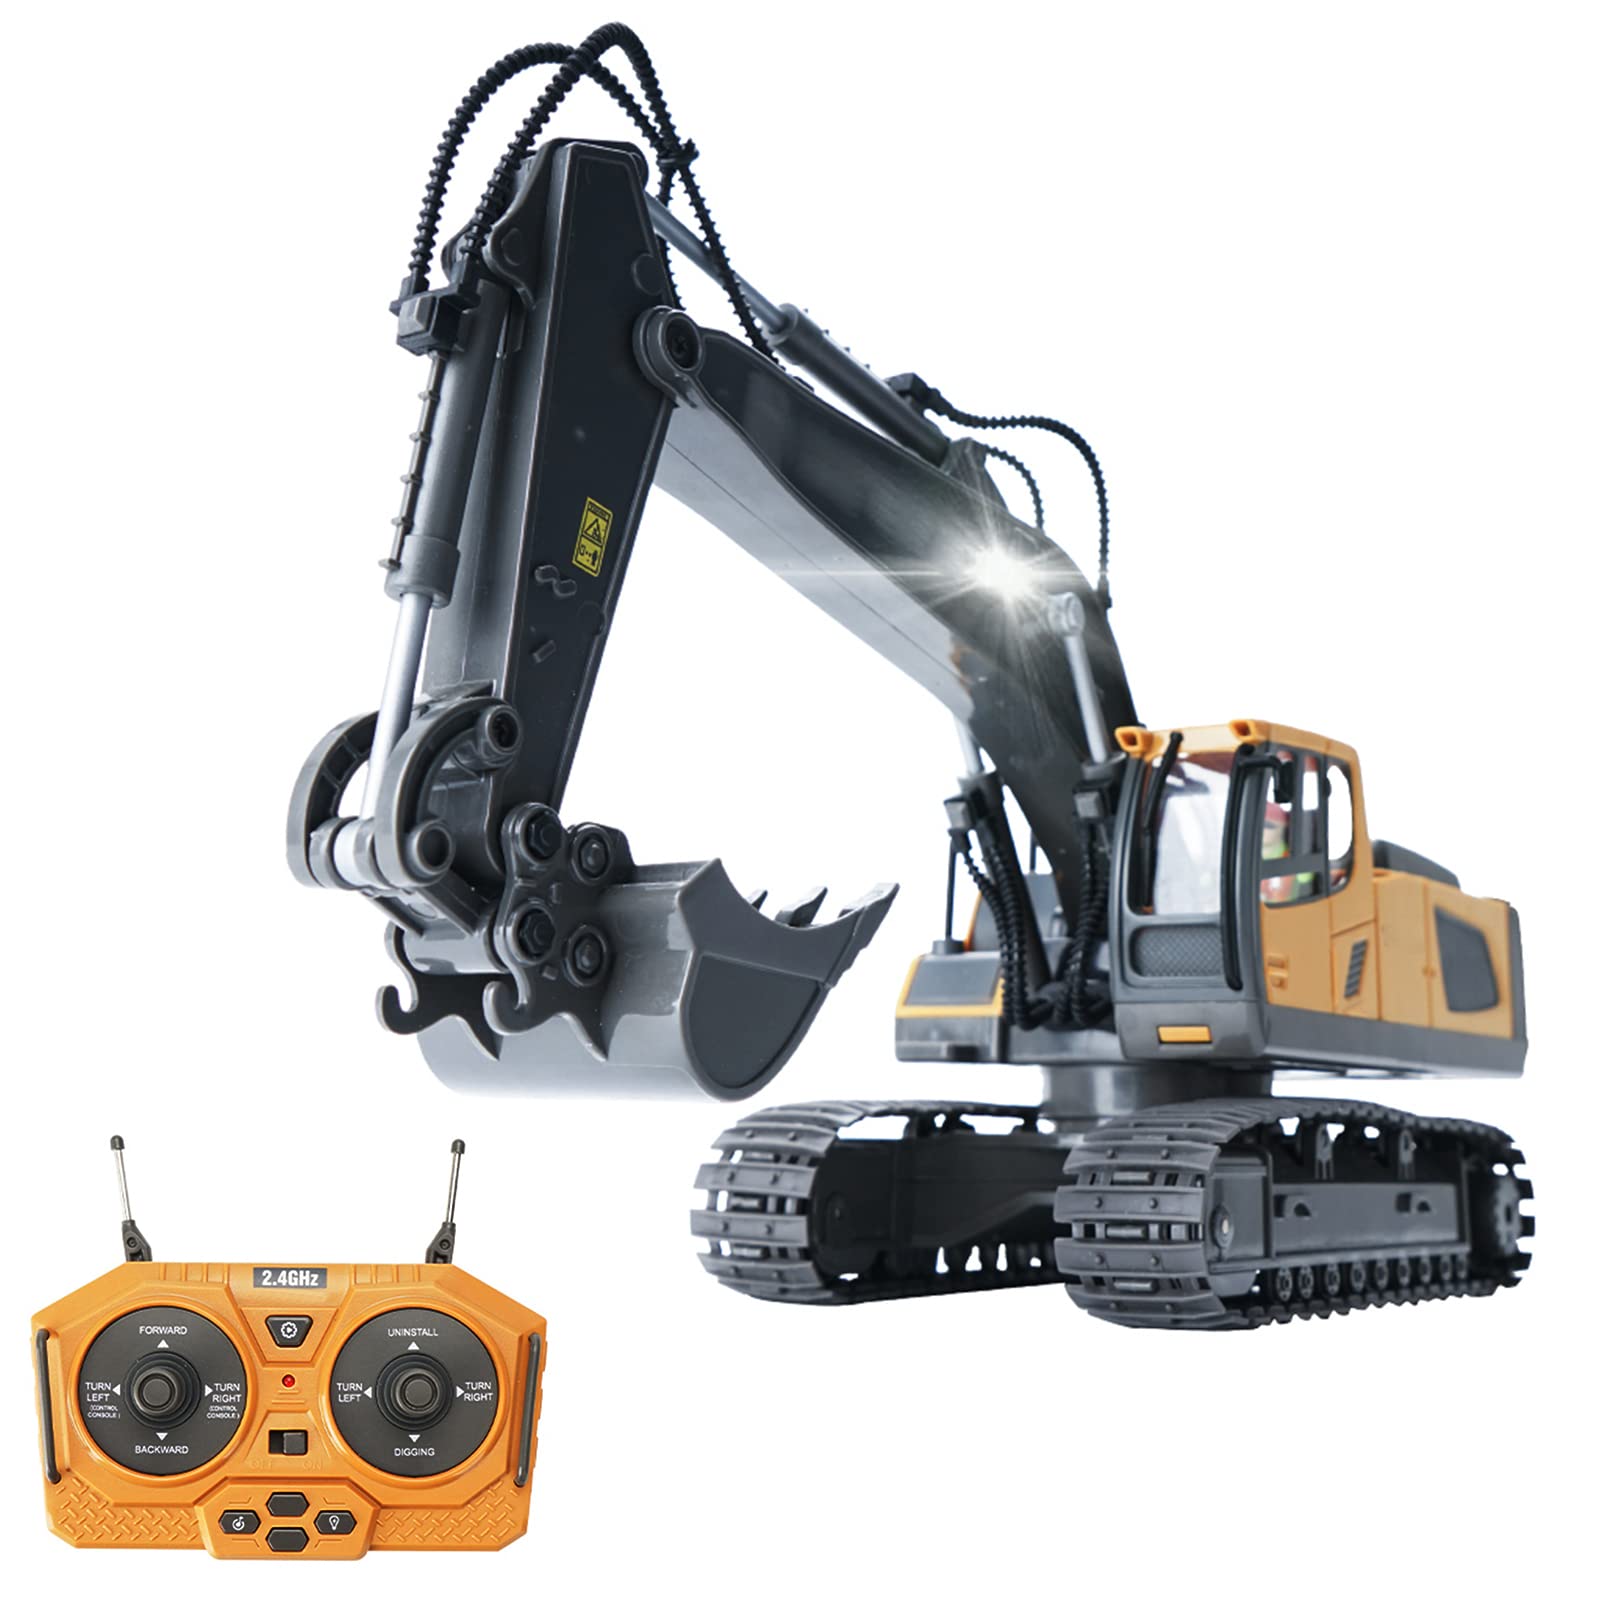 Goolsky RC Excavator 120 2.4GHz 11CH RC Construction Truck Engineering Vehicles Educational Toys for Kids with Light Music